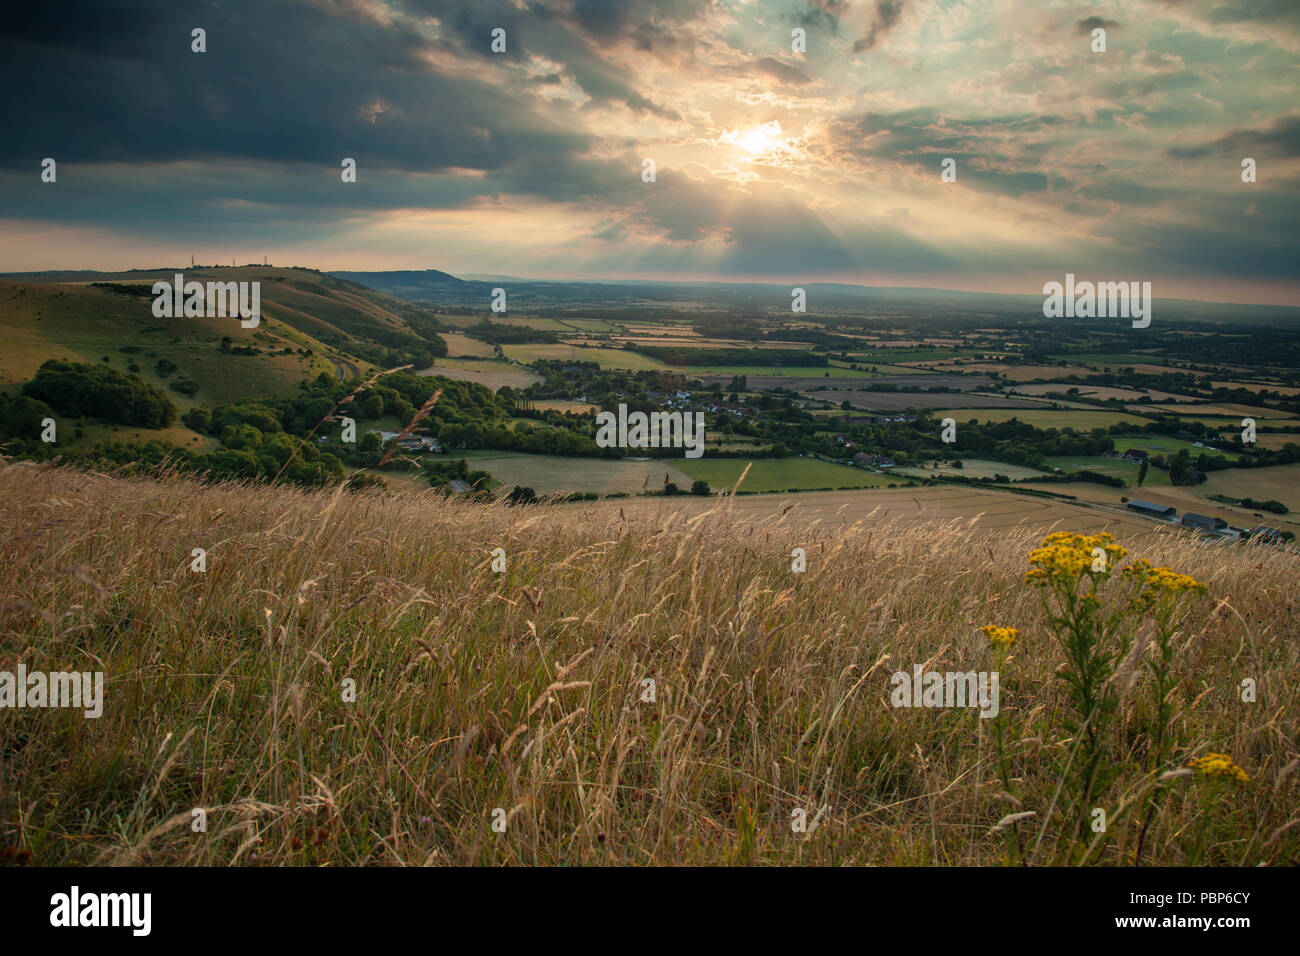 Summer evening on the South Downs, West Sussex, England. Stock Photo